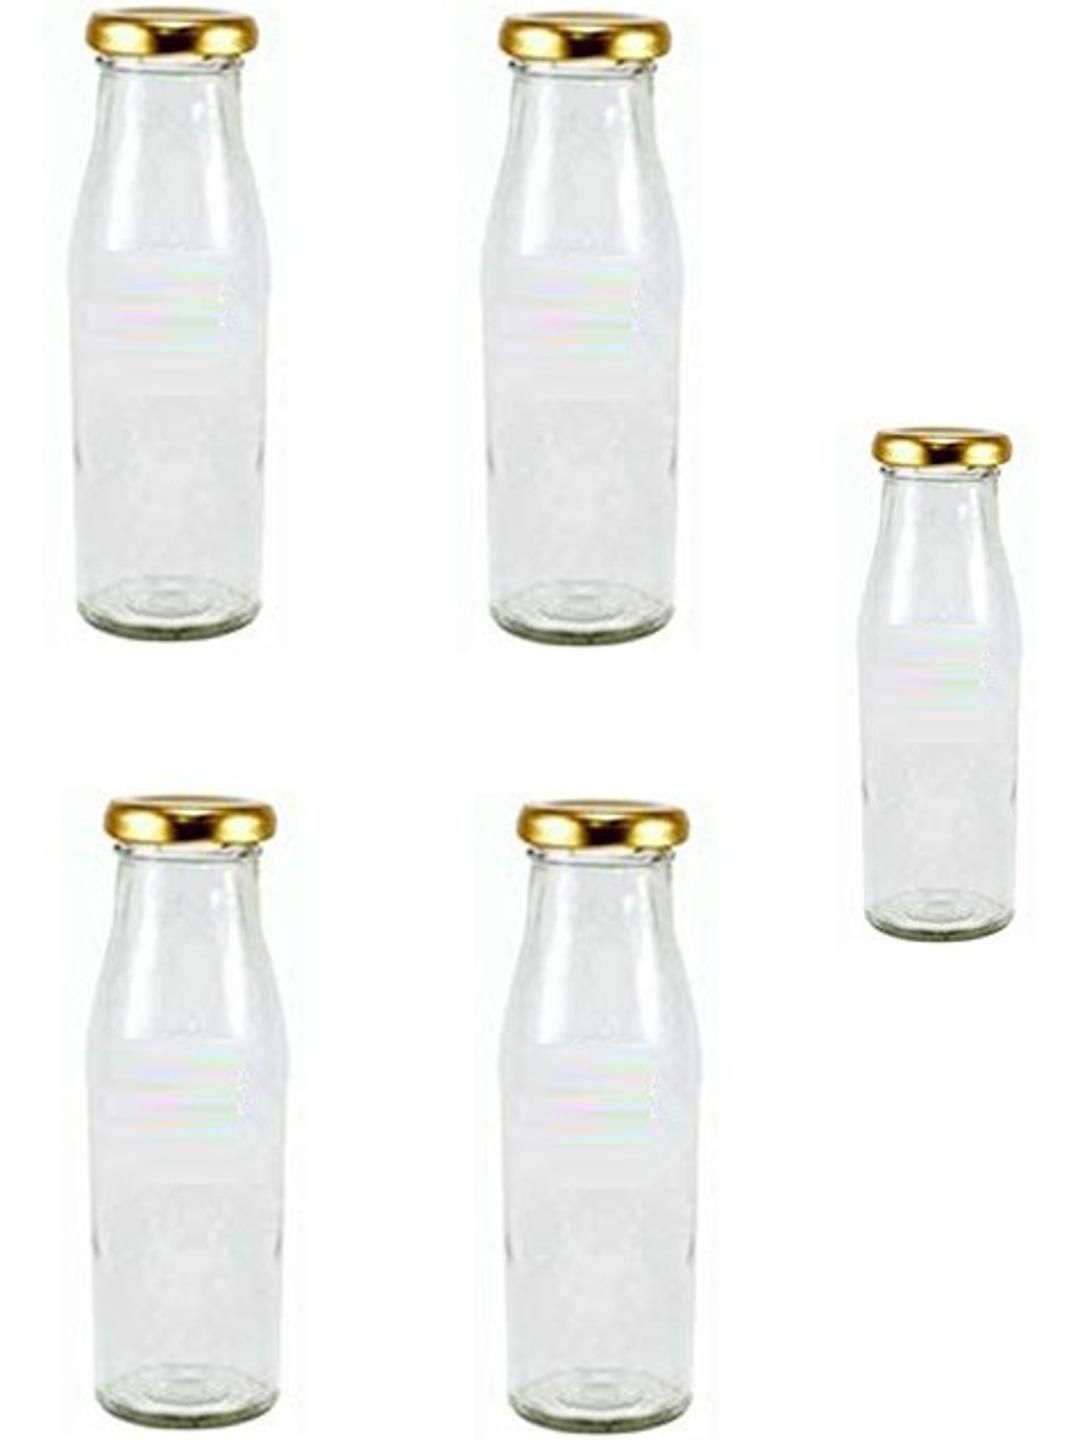     			AFAST Multipurpose Bottle Glass Transparent Utility Container ( Set of 5 )